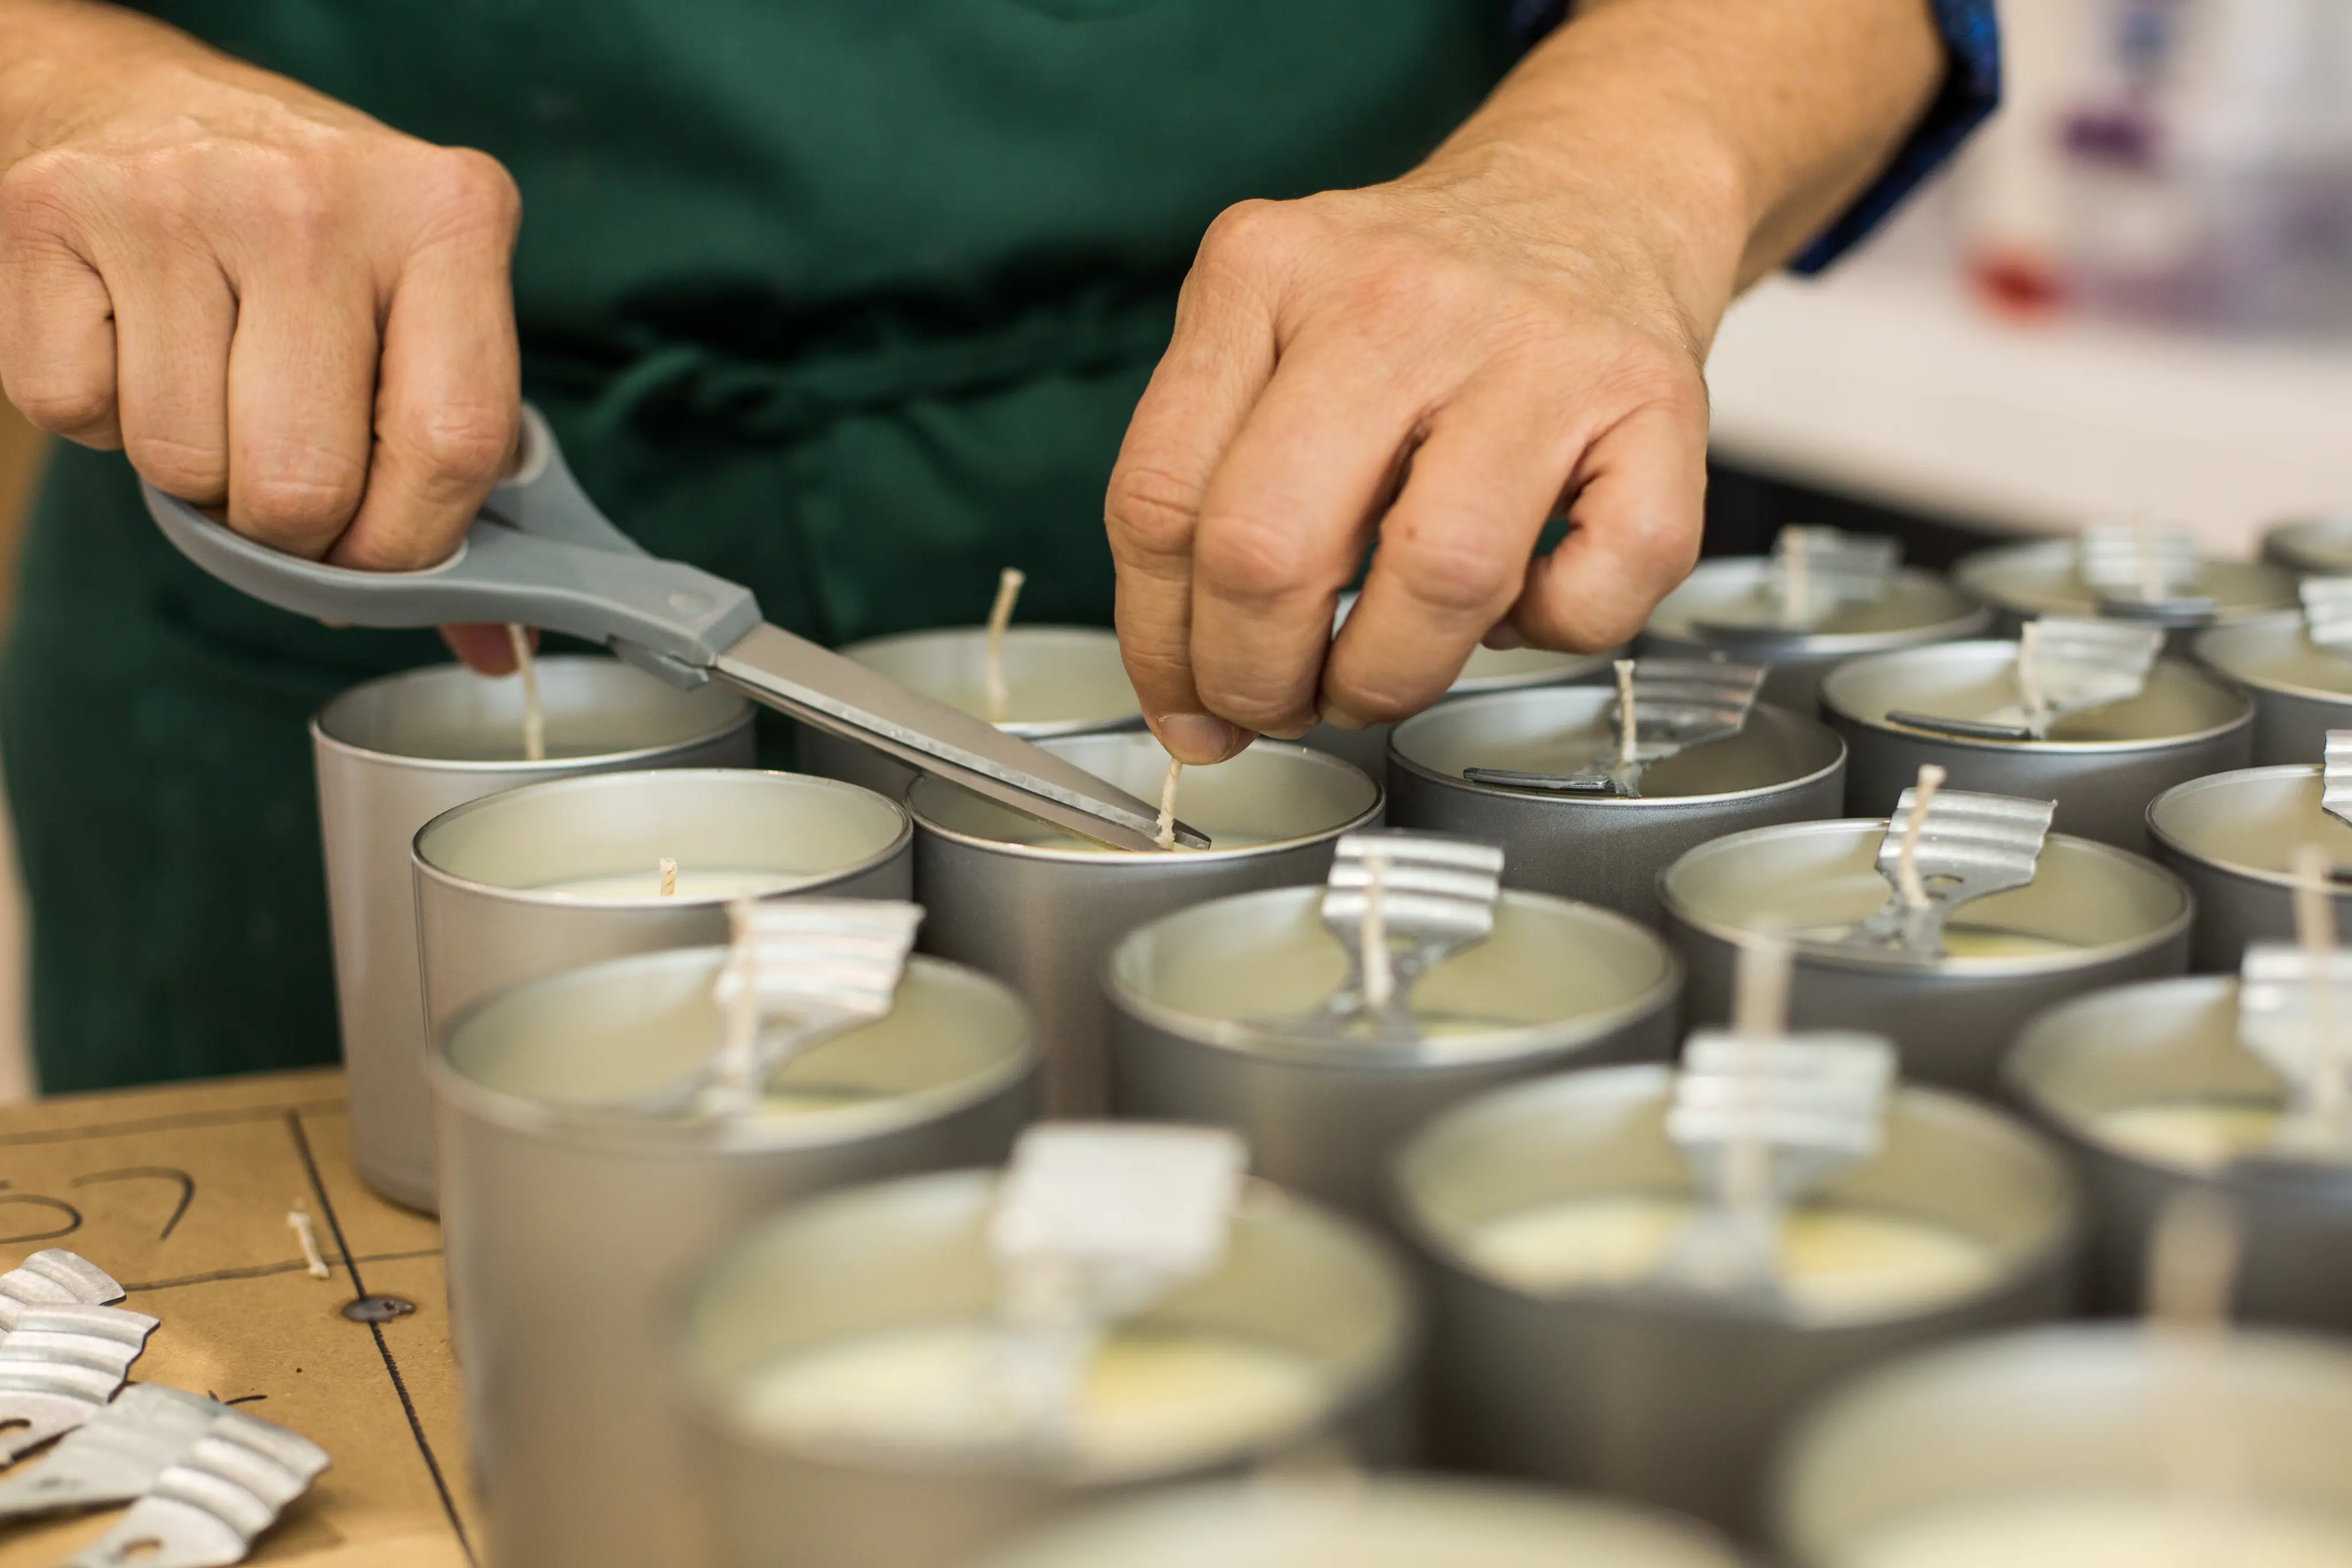 The process of candles being made